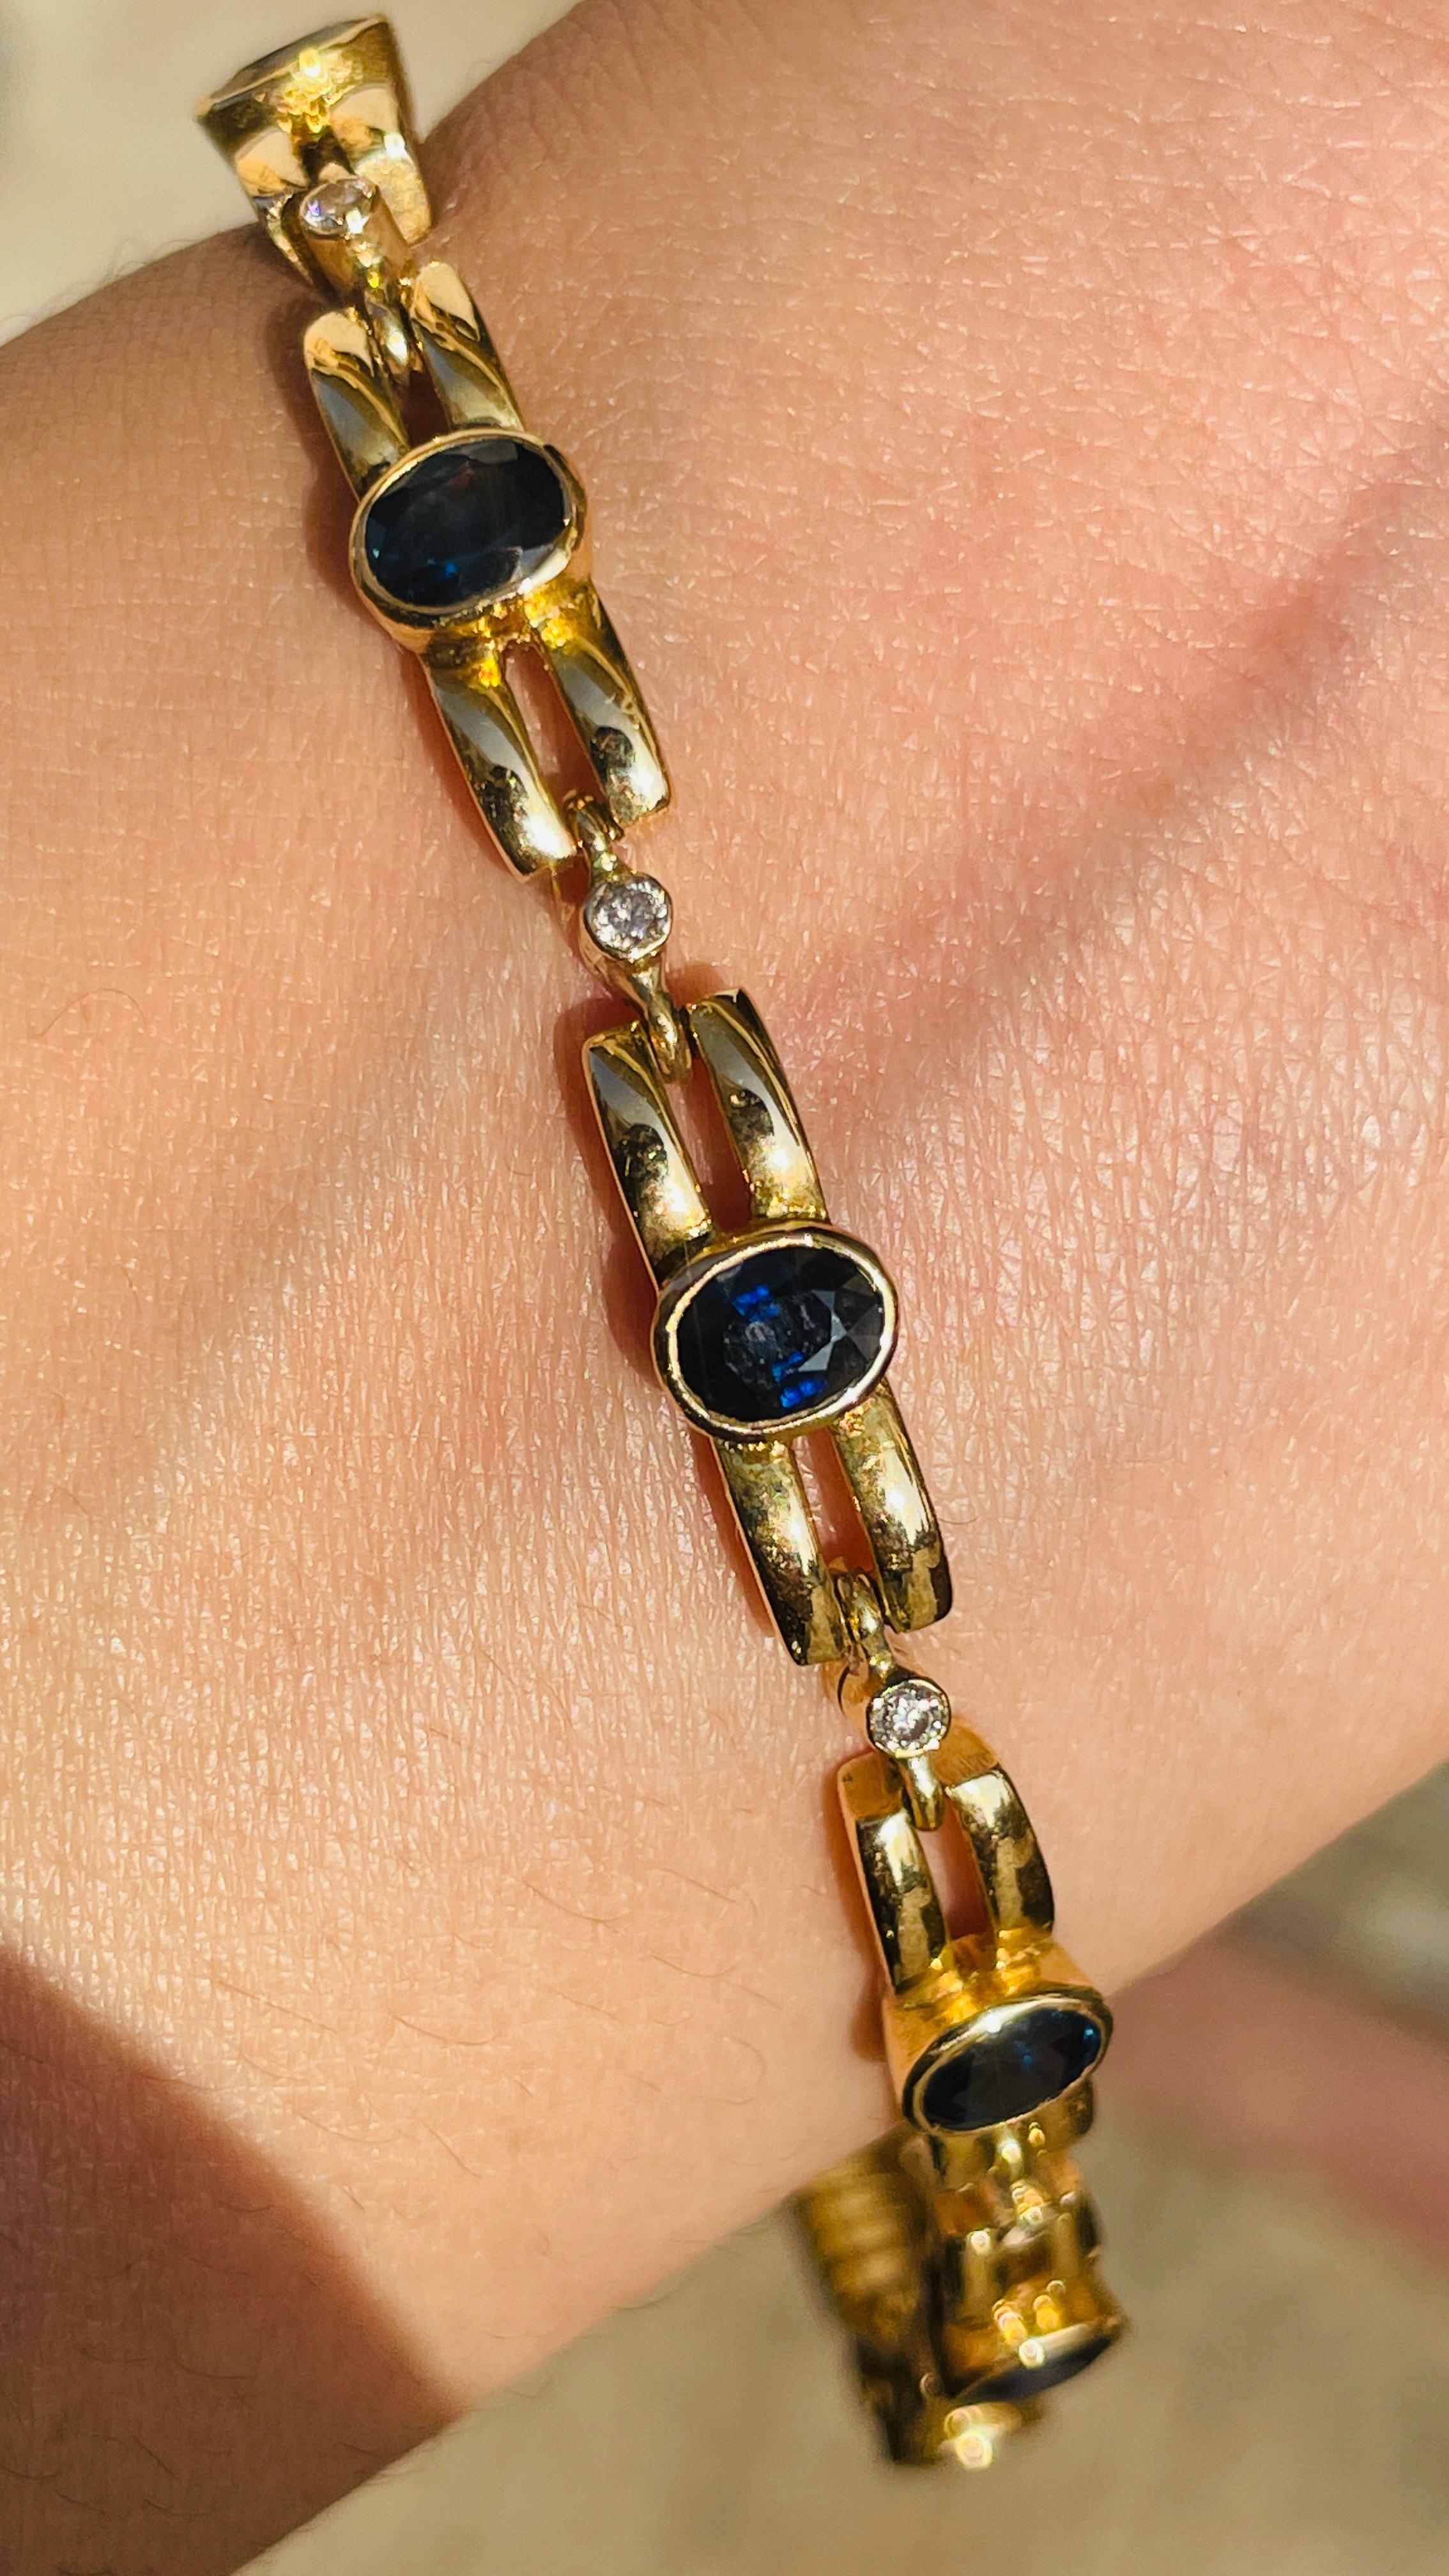 Blue Sapphire bracelet in 18K Gold. It has a perfect oval cut gemstone to make you stand out on any occasion or an event.
A tennis bracelet is an essential piece of jewelry when it comes to your wedding day. The sleek and elegant style complements